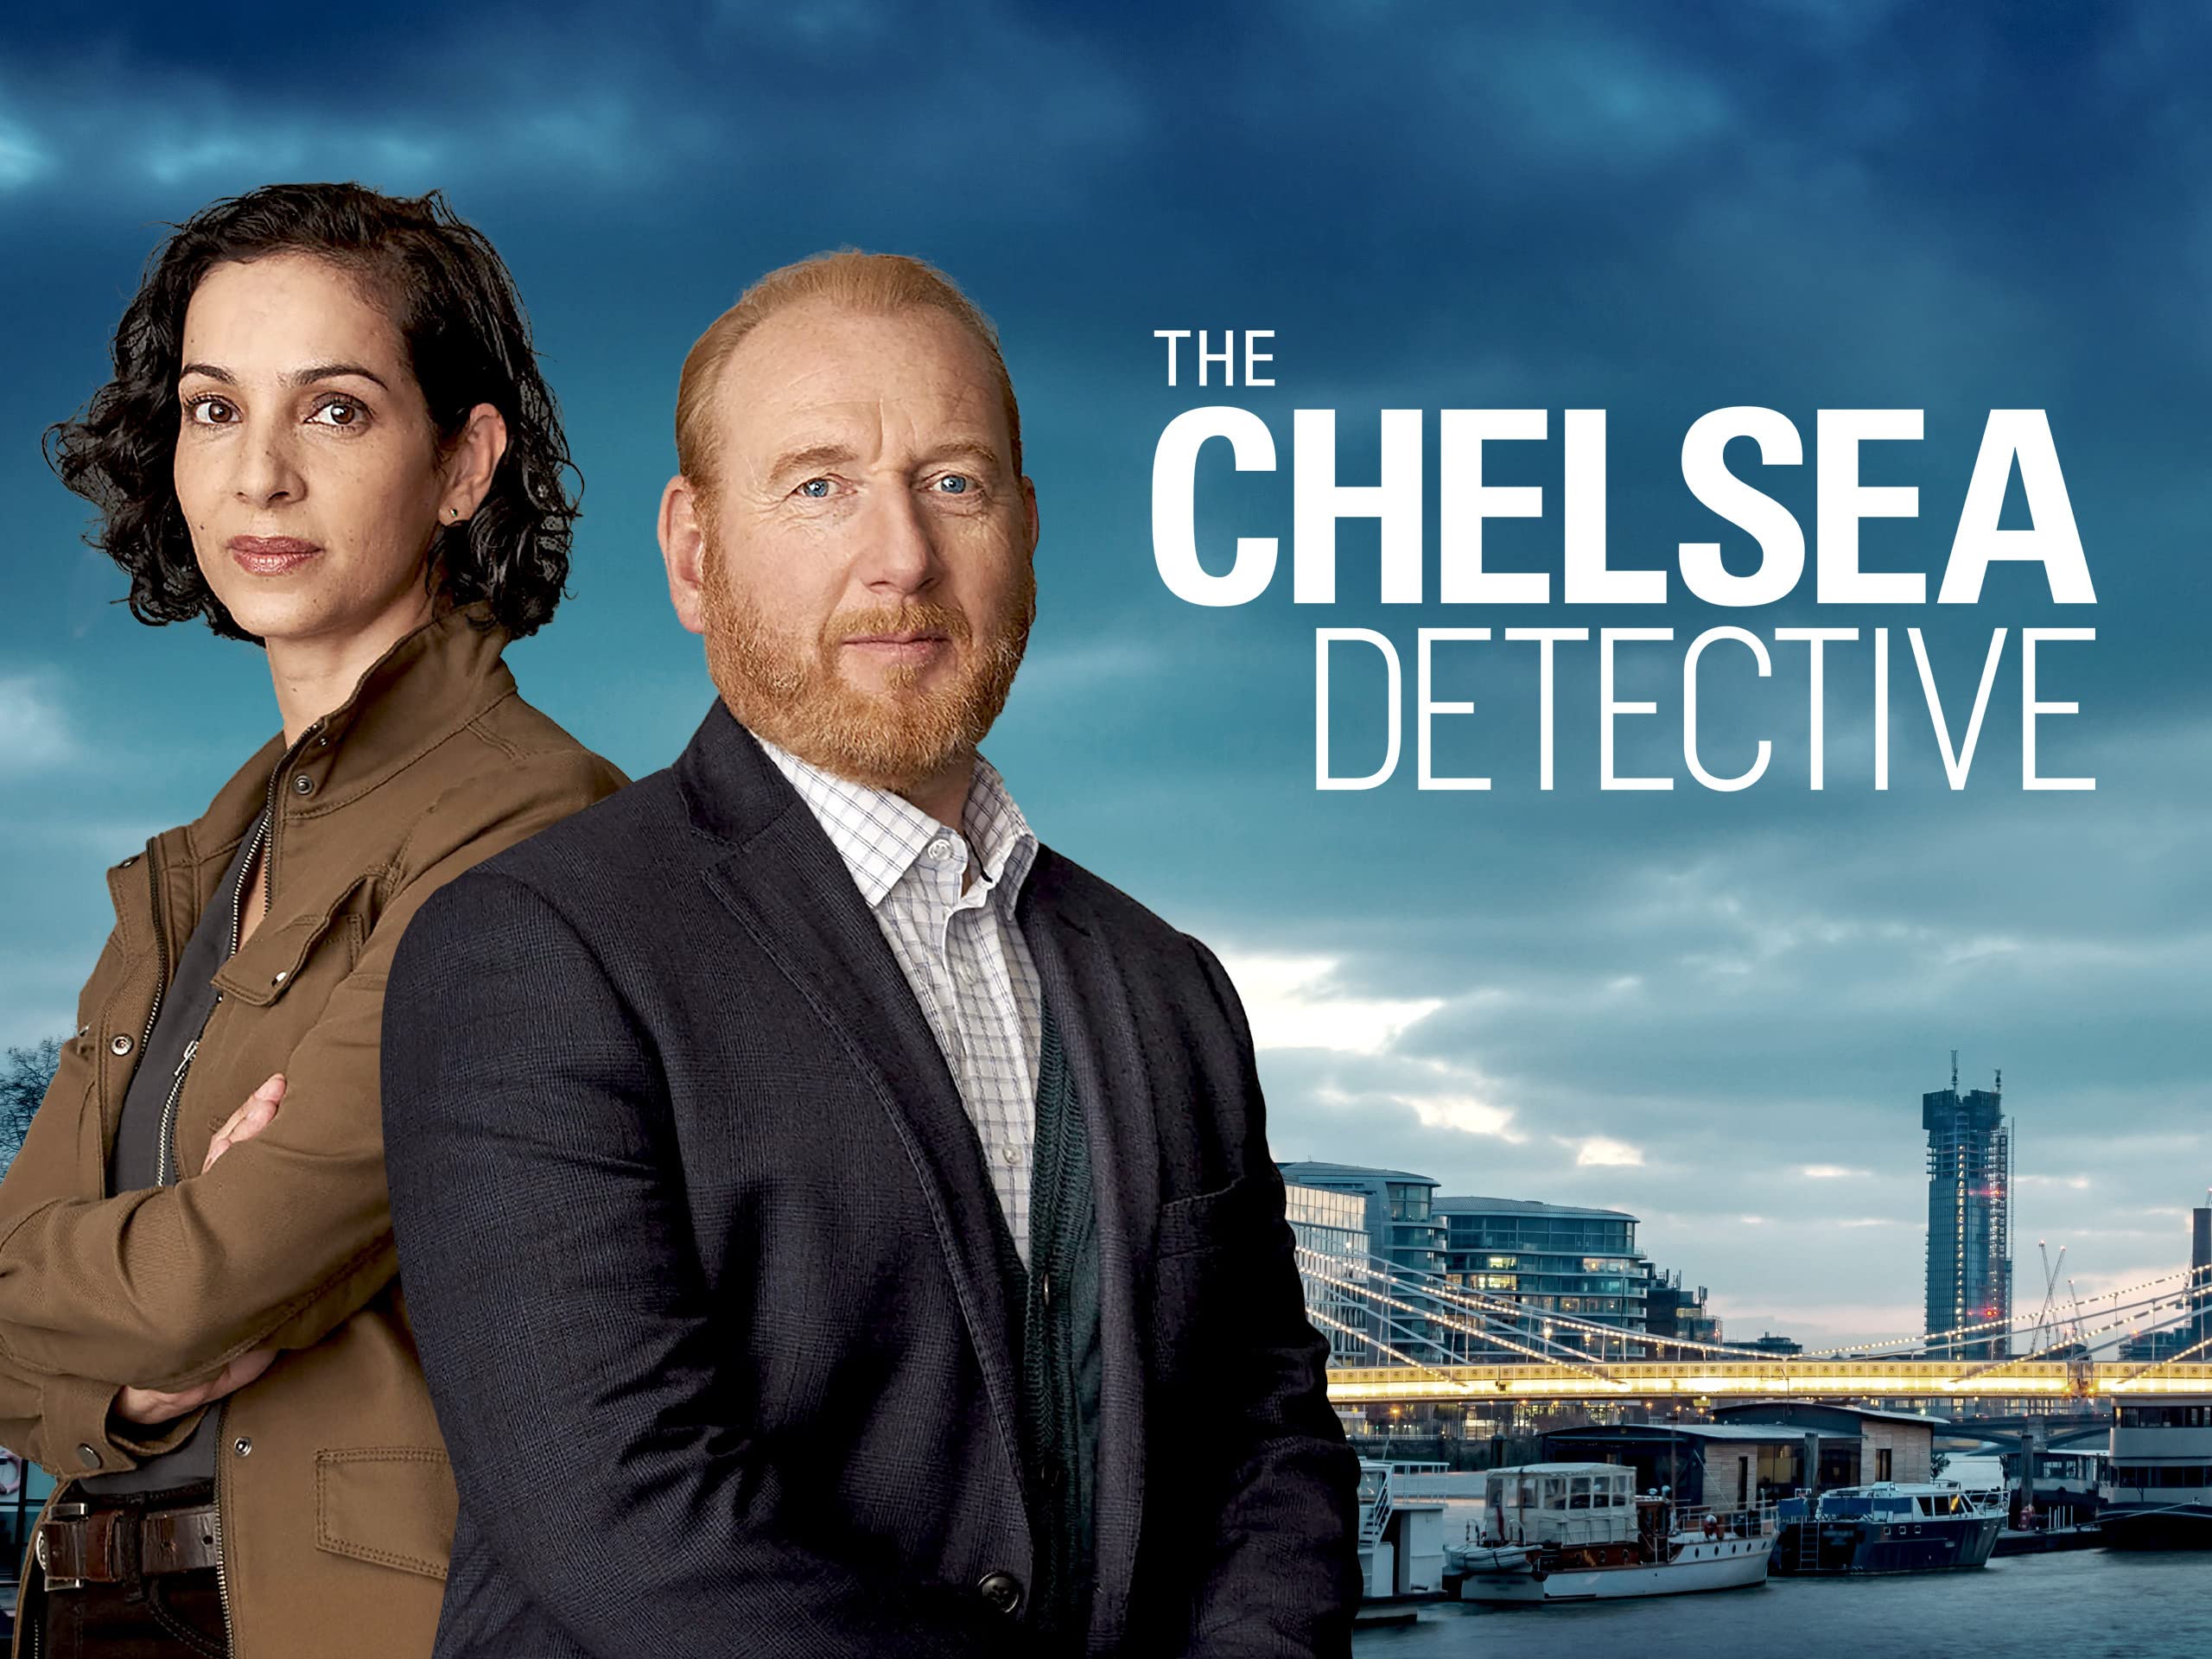 Acorn TV's Fan-Favorite Crime Drama "The Chelsea Detective" Returns Today on Monday, August 28